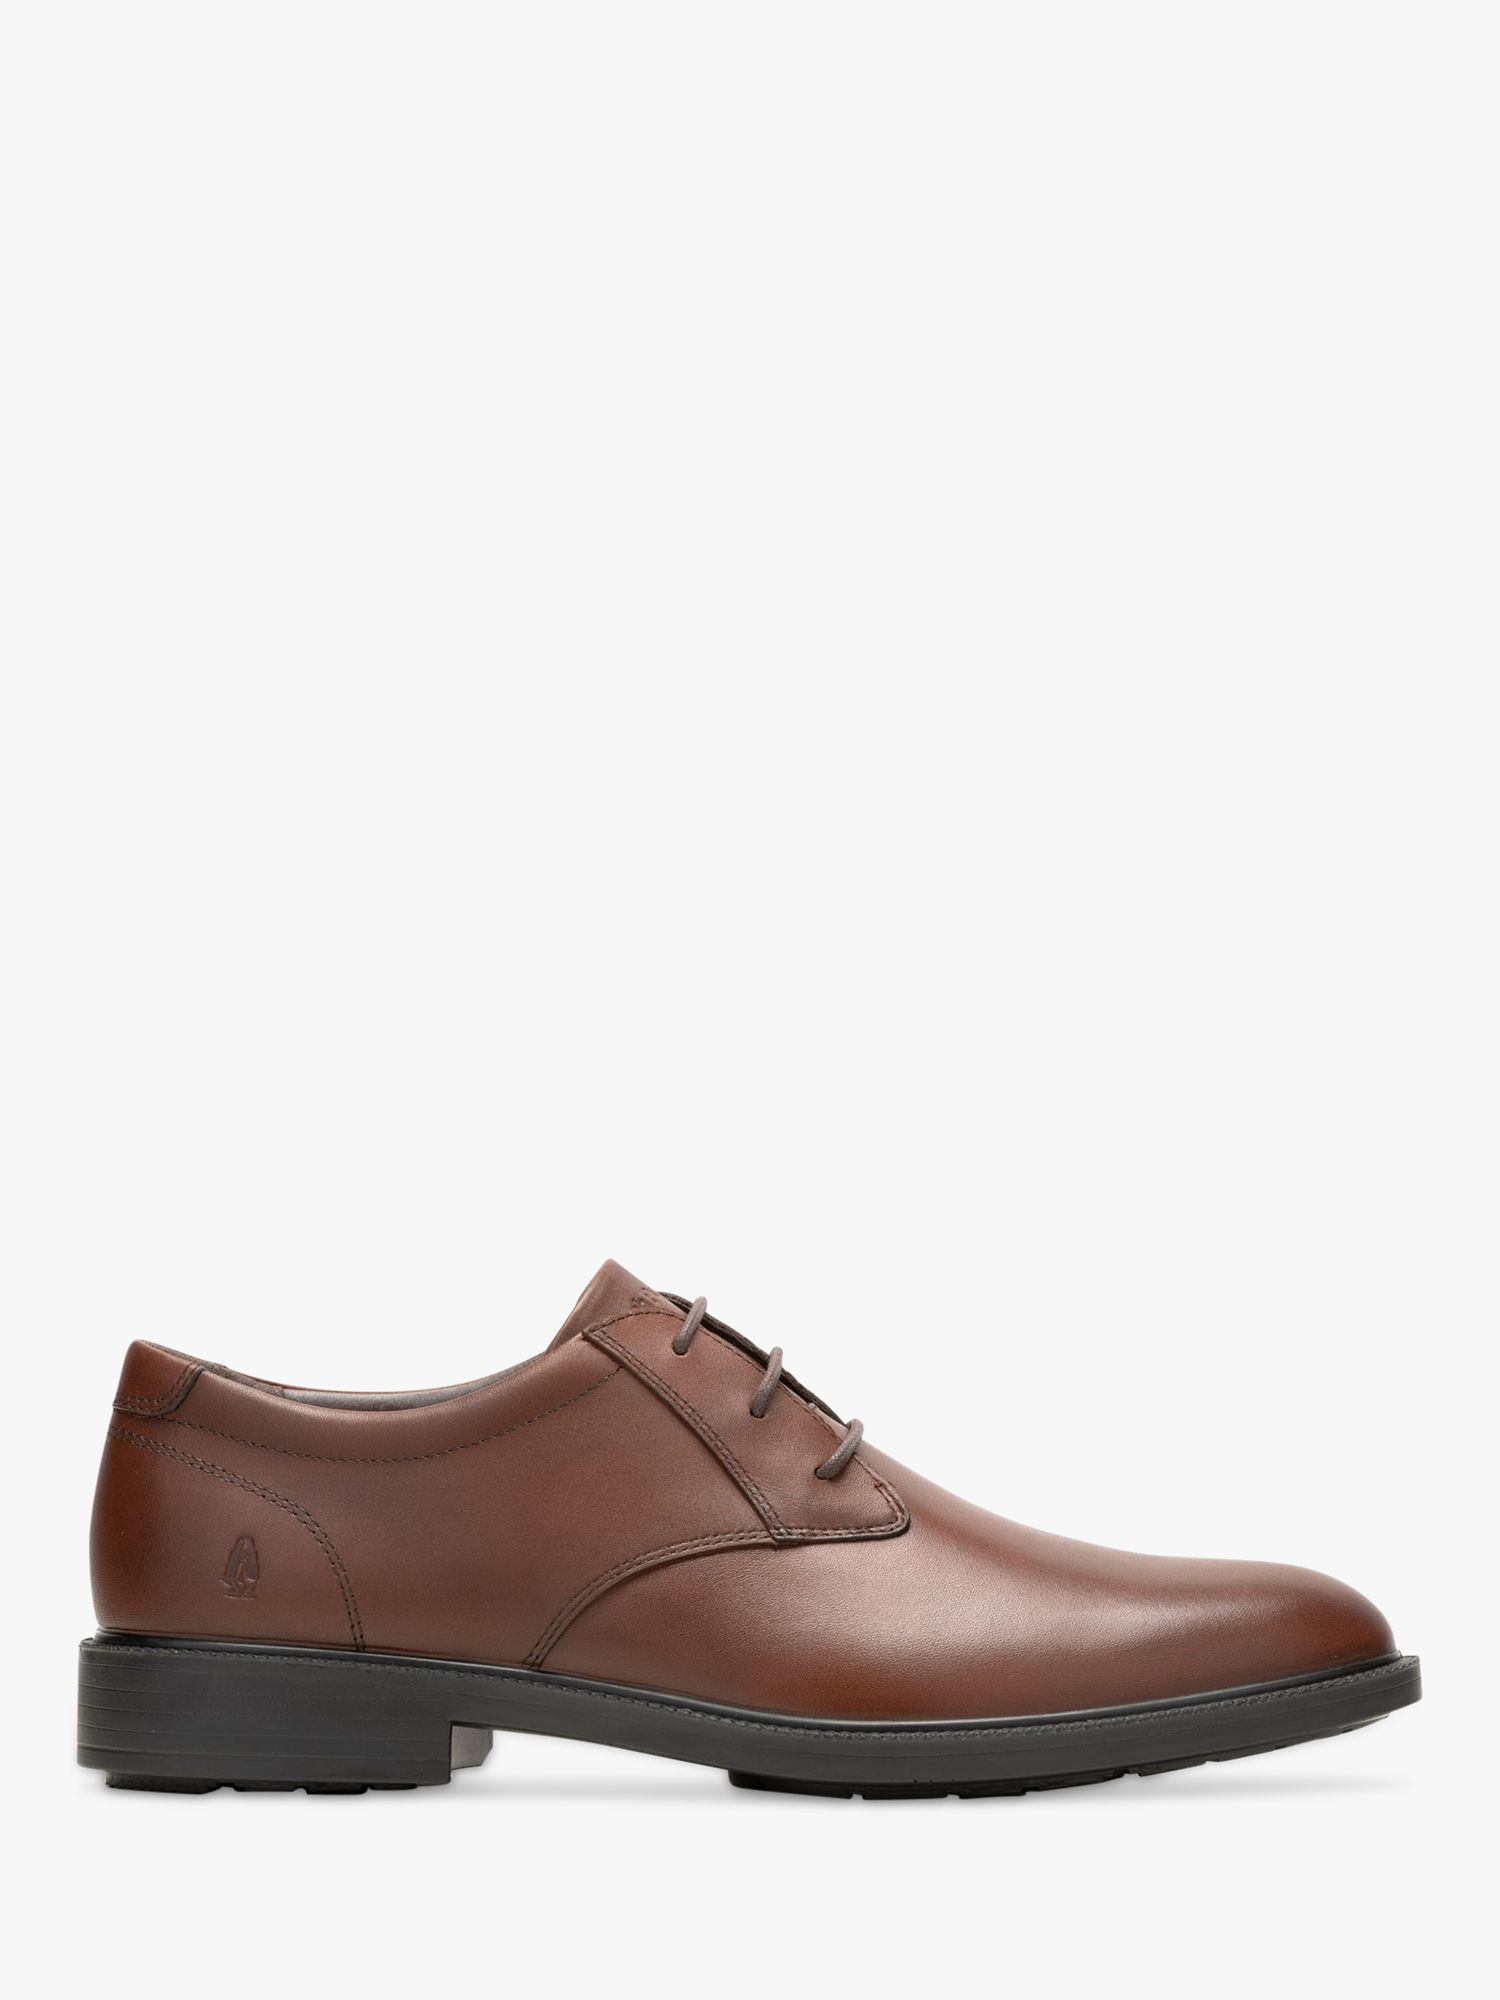 Hush Puppies Banker Lace-Up Shoes, Brown at John Lewis & Partners